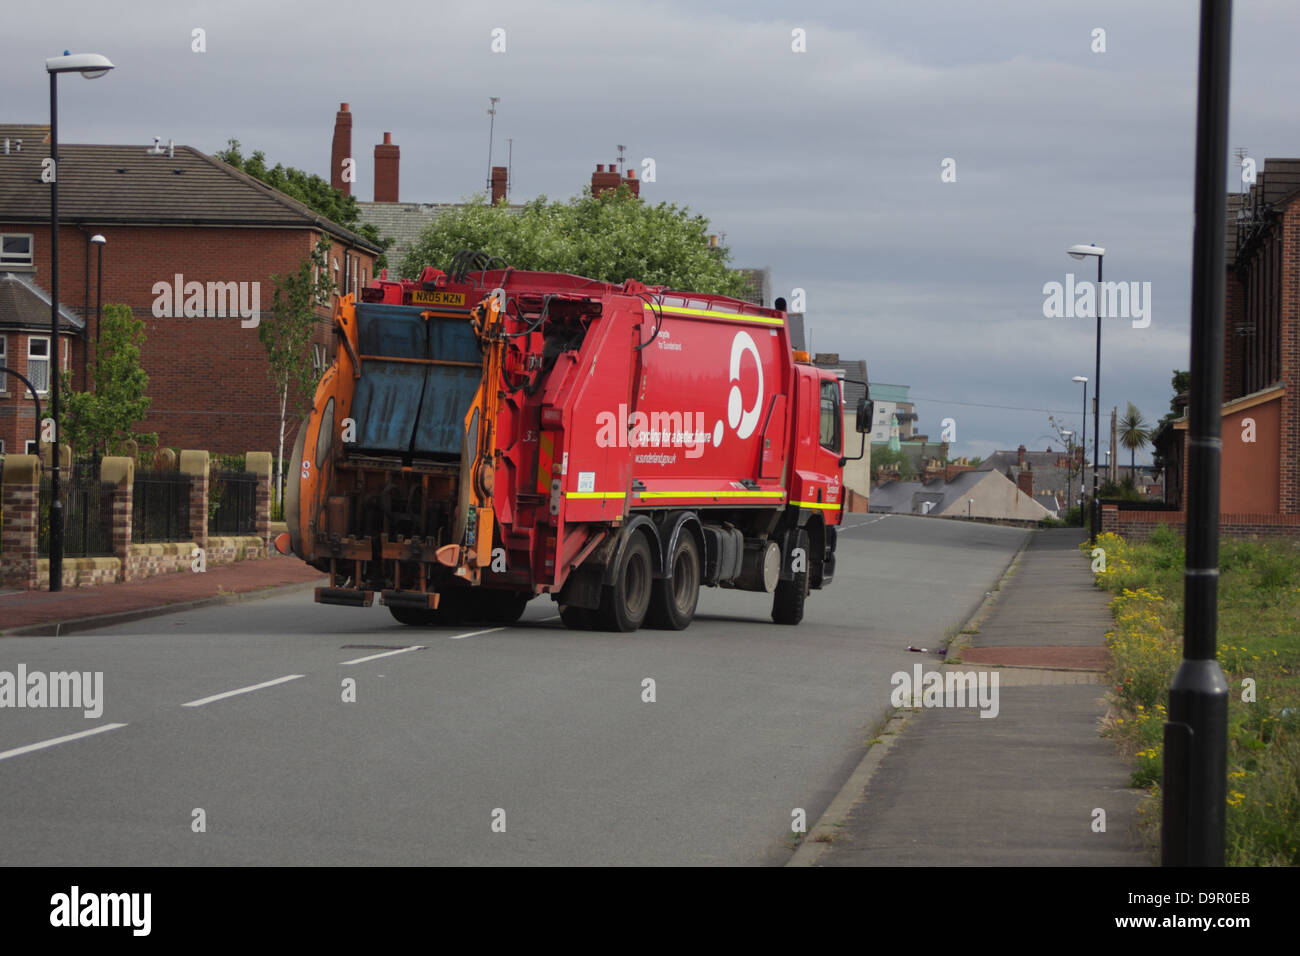 bin lorry / refuse collection. Stock Photo